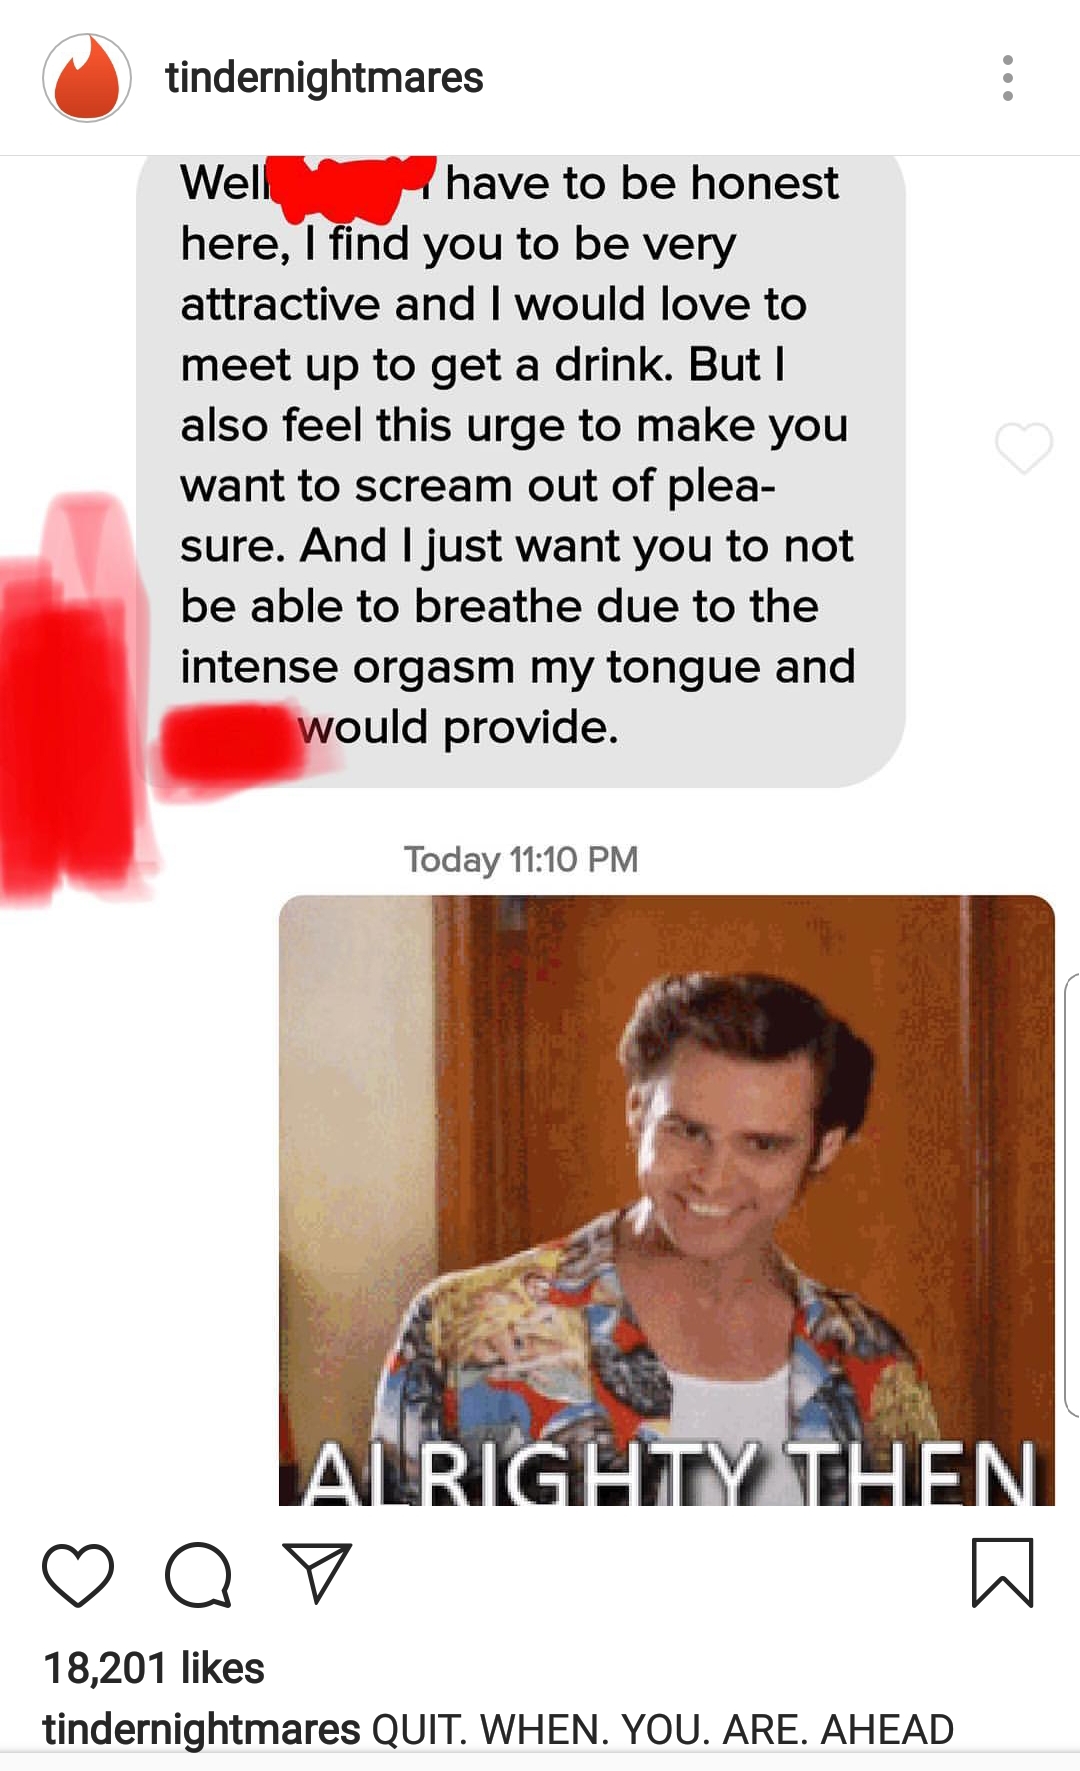 memes - media - tindernightmares Well have to be honest here, I find you to be very attractive and I would love to meet up to get a drink. But I also feel this urge to make you want to scream out of plea sure. And I just want you to not be able to breathe